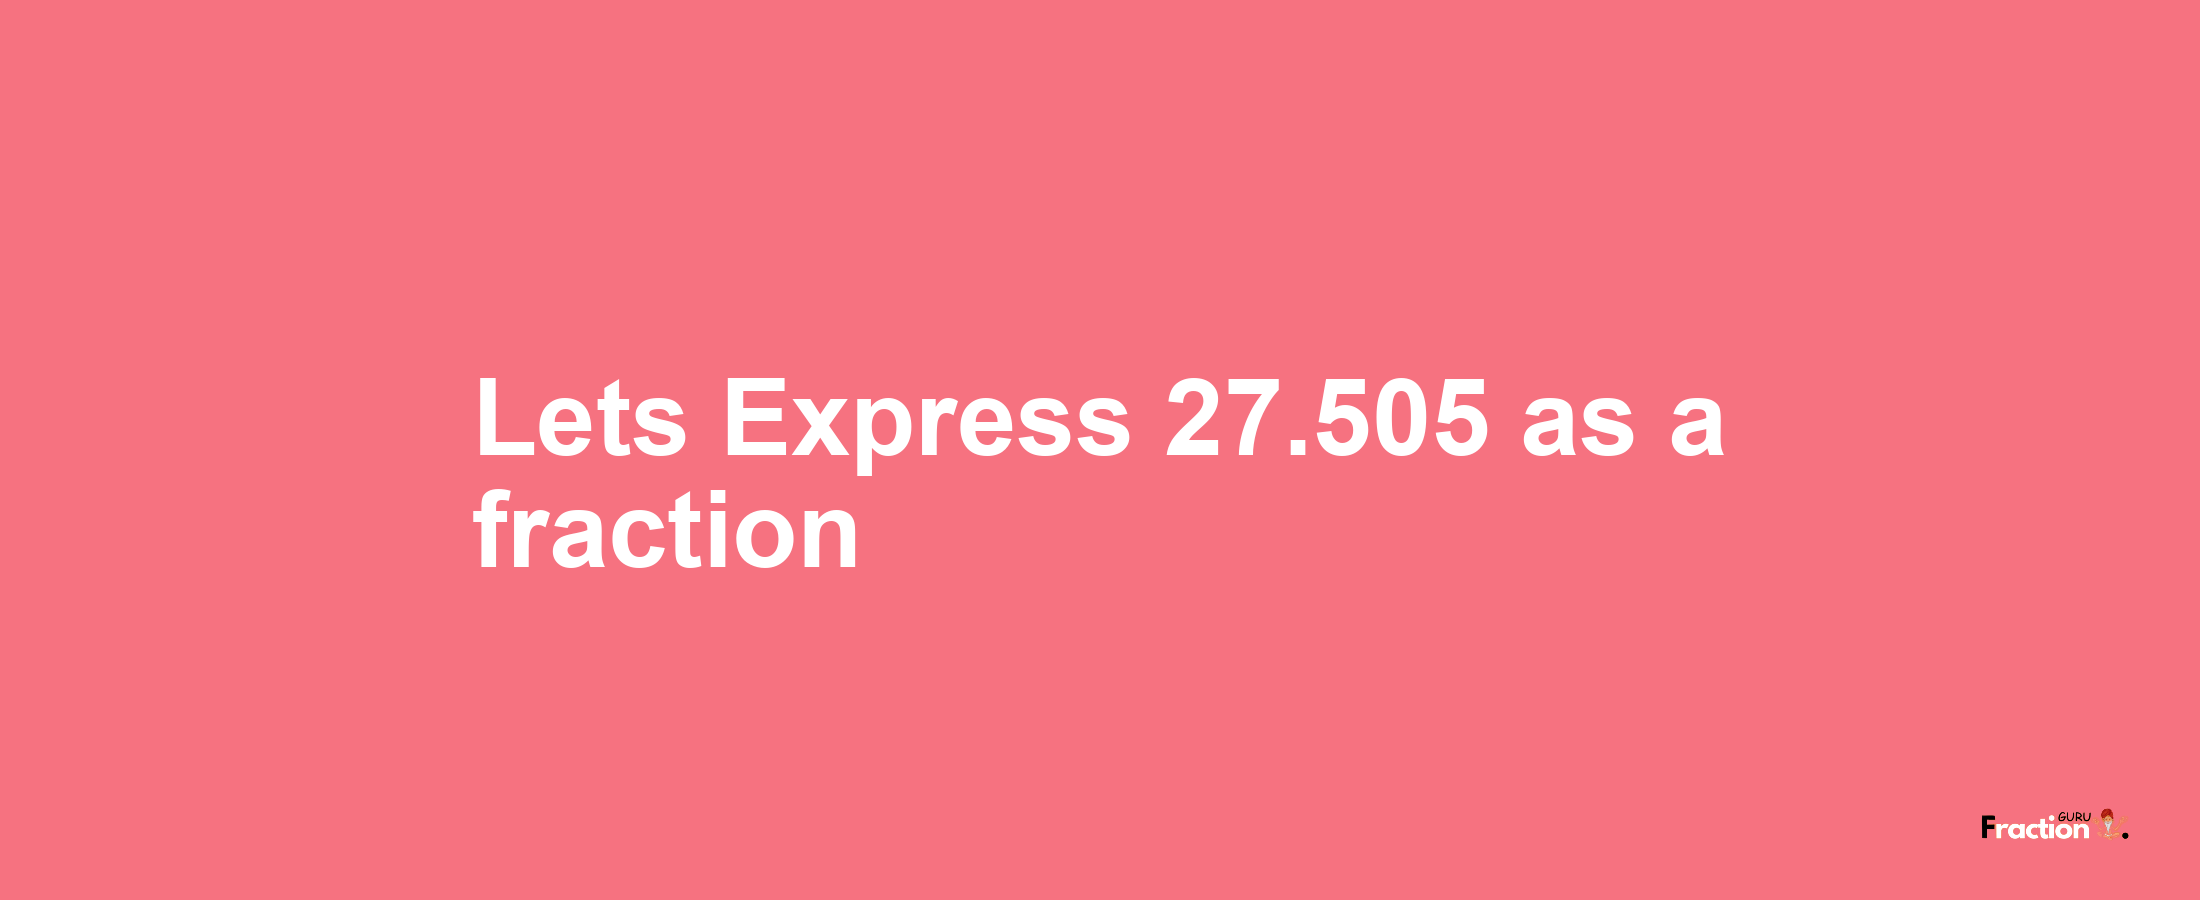 Lets Express 27.505 as afraction